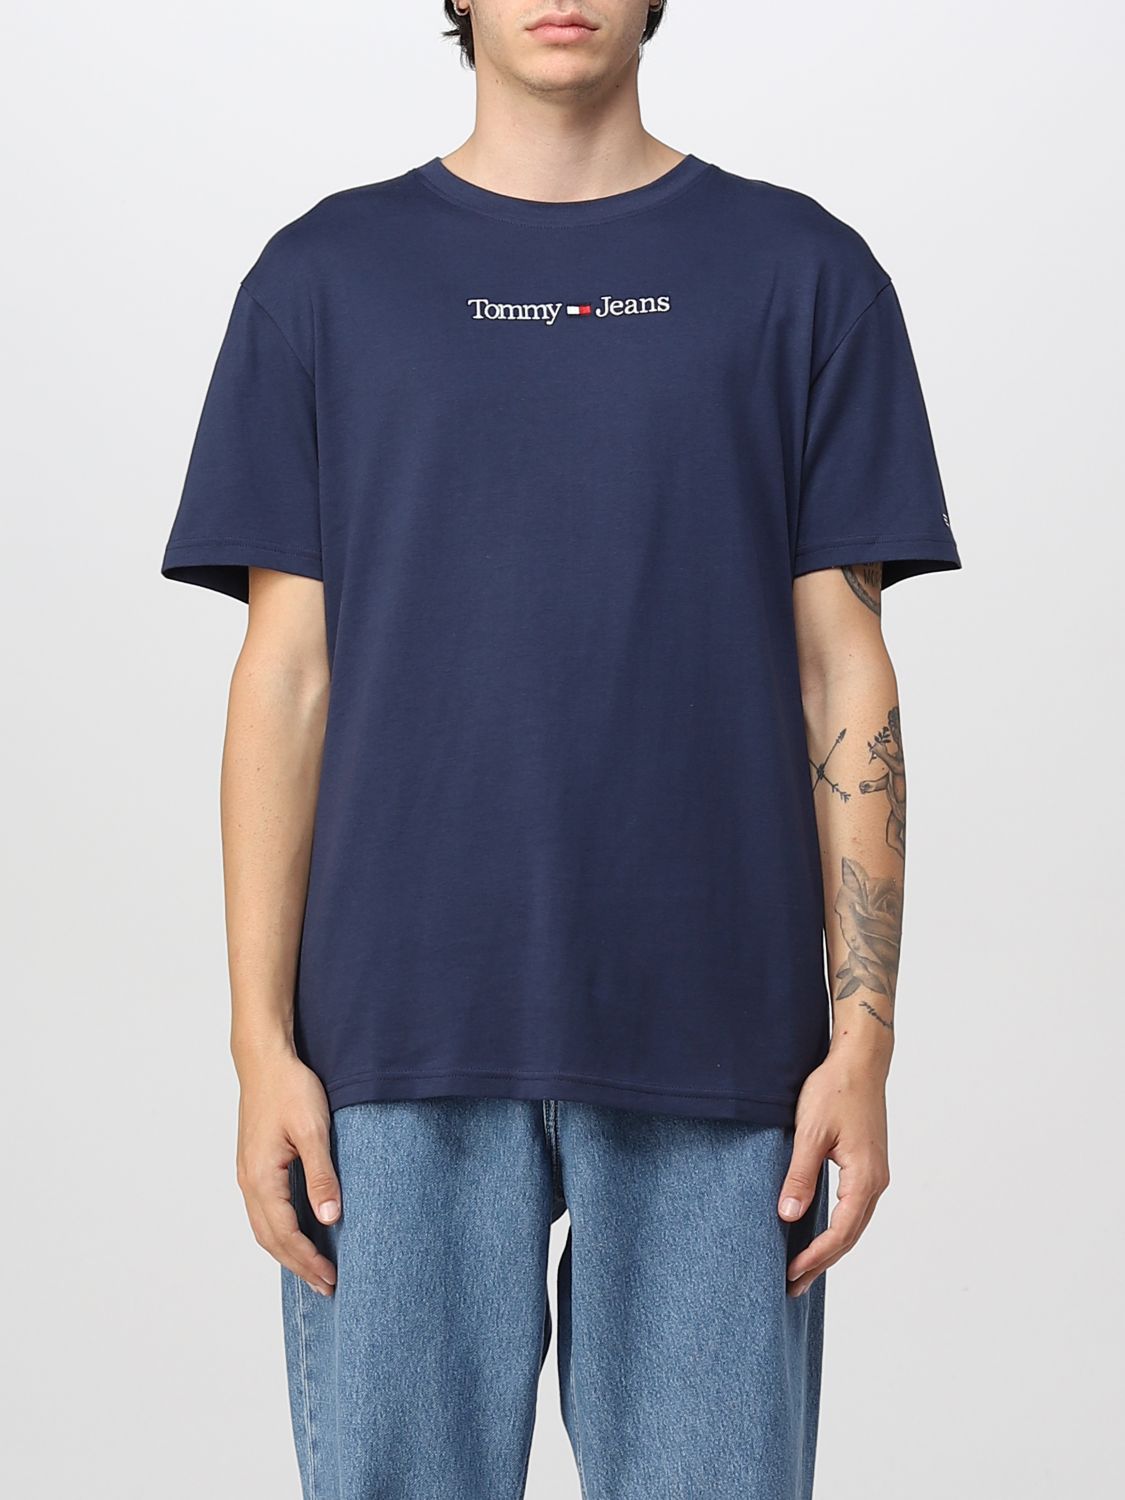 TOMMY JEANS: t-shirt for man - Navy | Tommy Jeans t-shirt DM0DM14984 ...